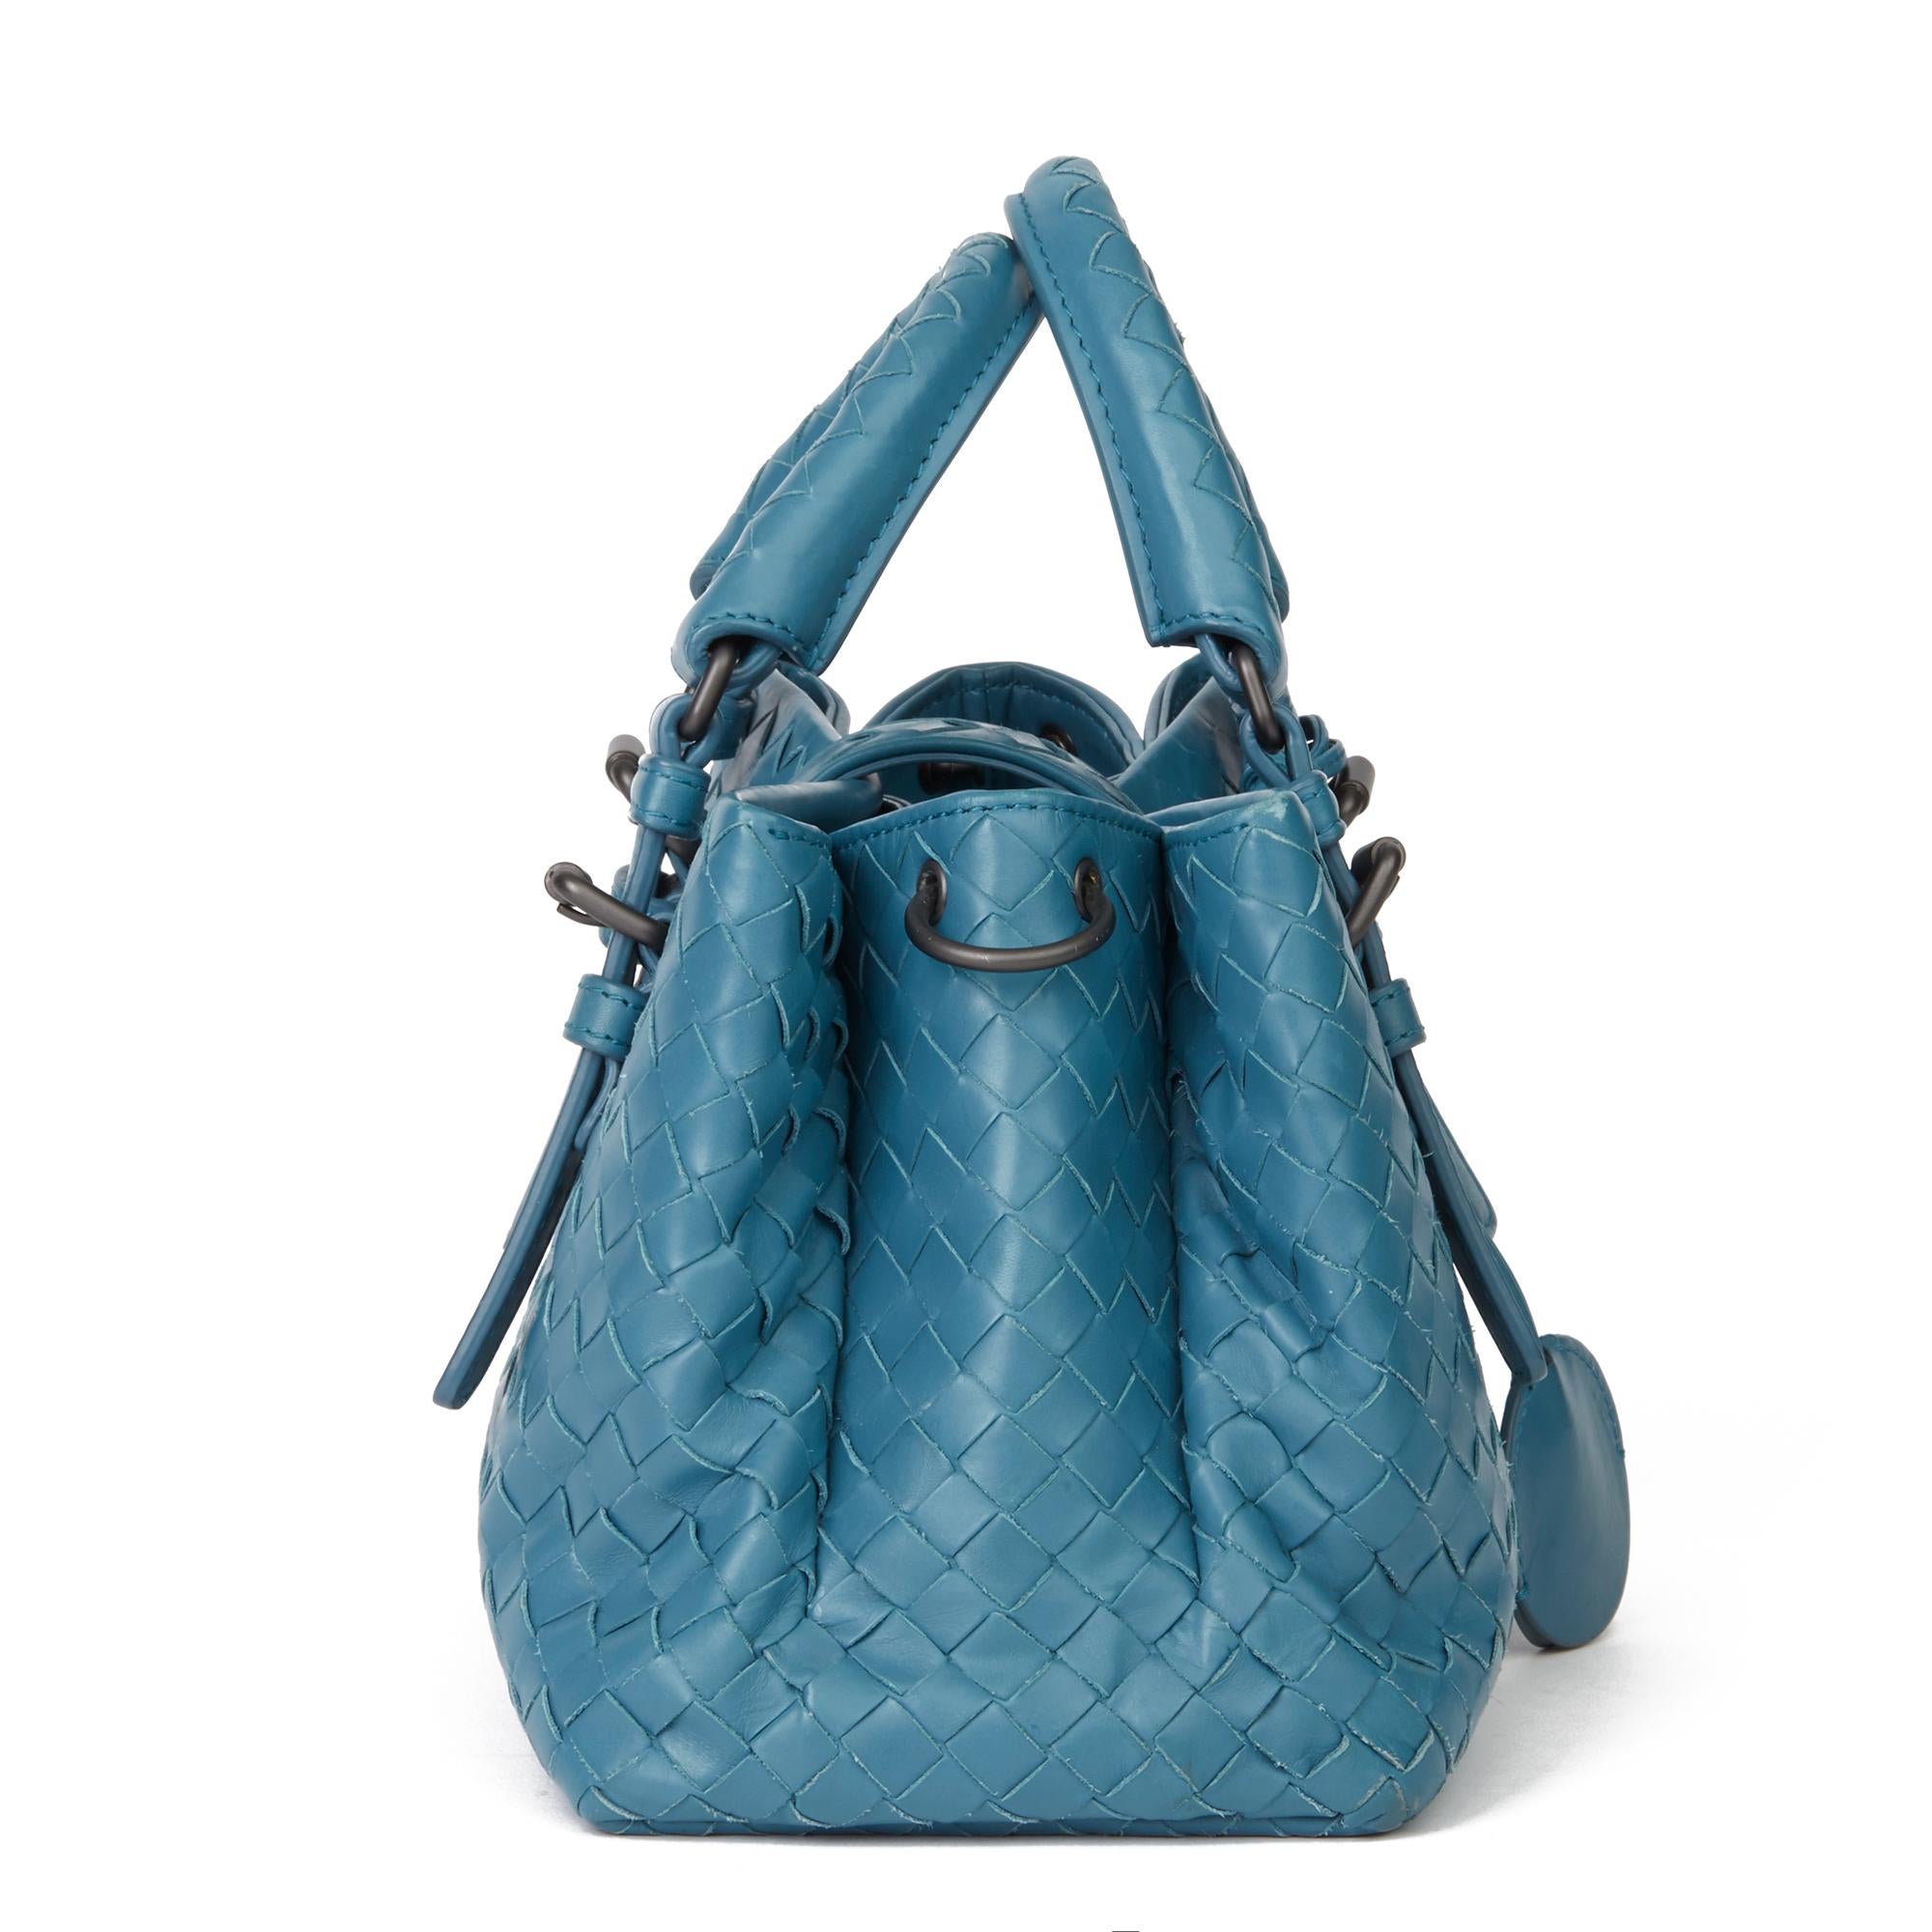 BOTTEGA VENETA
Blue Woven Calfskin Leather Mini Roma

Xupes Reference: HB2989
Serial Number: 806295059S
Age (Circa): 2015
Accompanied By: Bottega Veneta Dust Bag, Key, Clochette, Shoulder Strap
Authenticity Details: Serial Tag (Made in